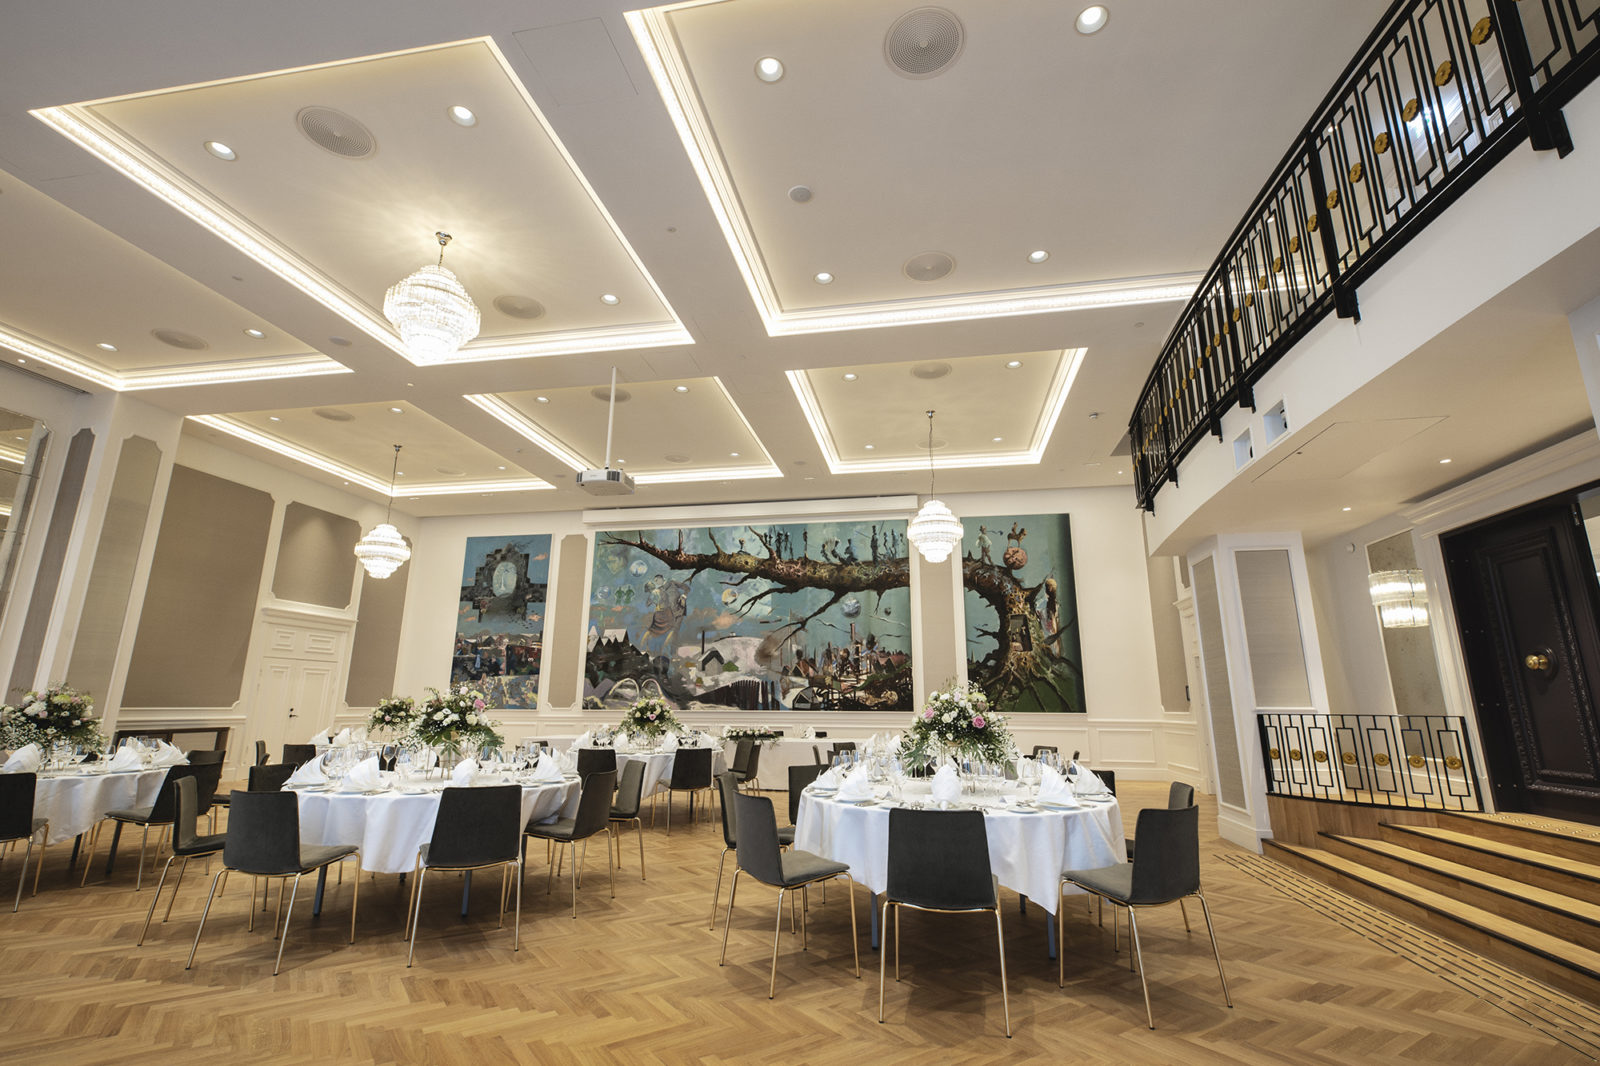 Britannia Hall with high ceiling, fine details, beautiful artwork and rounded table seating